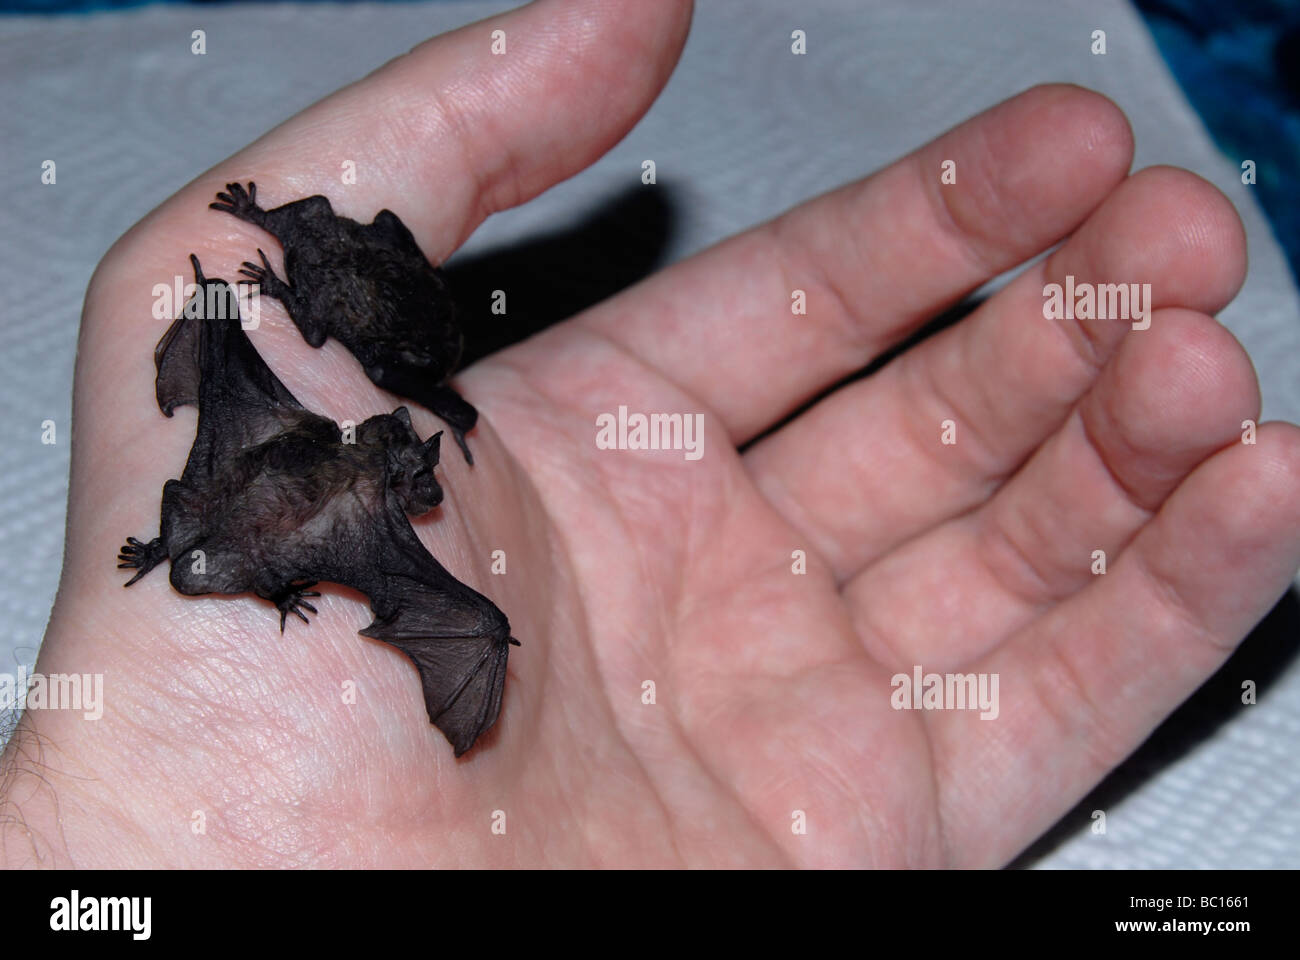 2 bats (common pipistrelle), about 2 weeks old, sitting on a hand, one with open wings Stock Photo